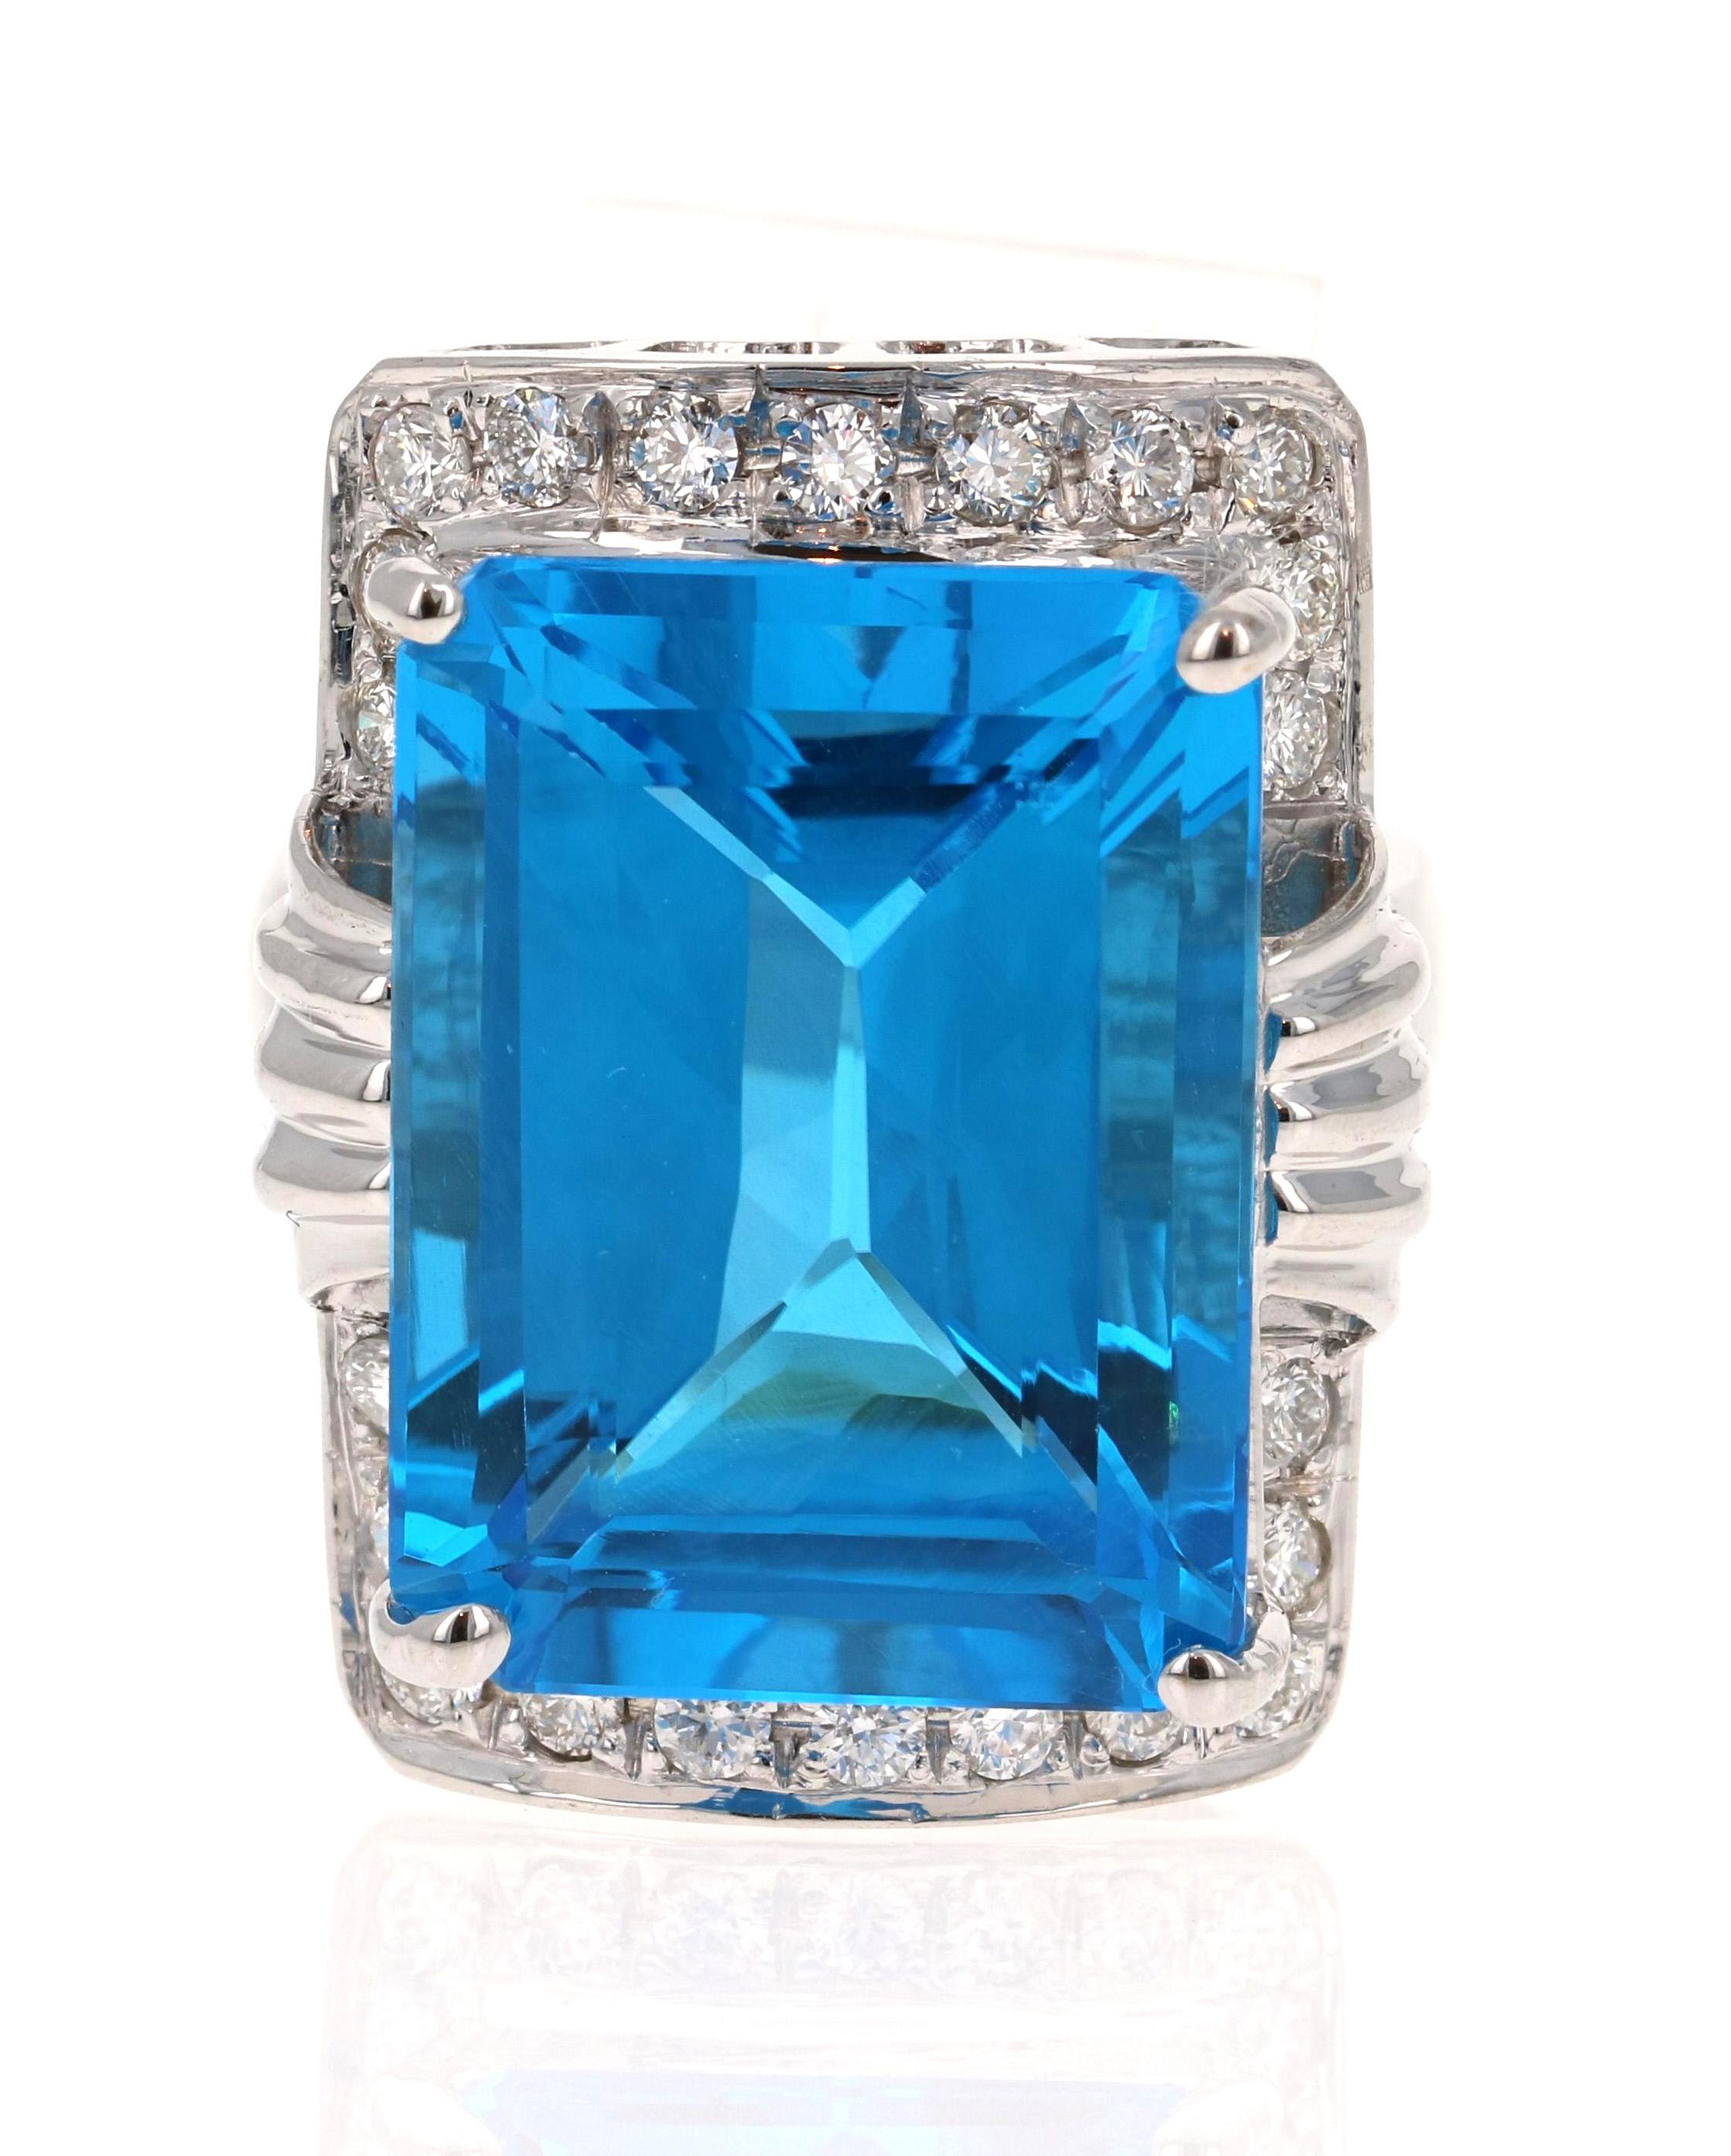 A true statement piece! 
This stunning ring has a huge Emerald Cut Blue Topaz that weighs 25.31 carats and is surrounded by 22 Round Cut Diamonds that weigh 0.76 carat (Clarity: SI, Color: F). The total carat weight of the ring is 26.07 carats.

The